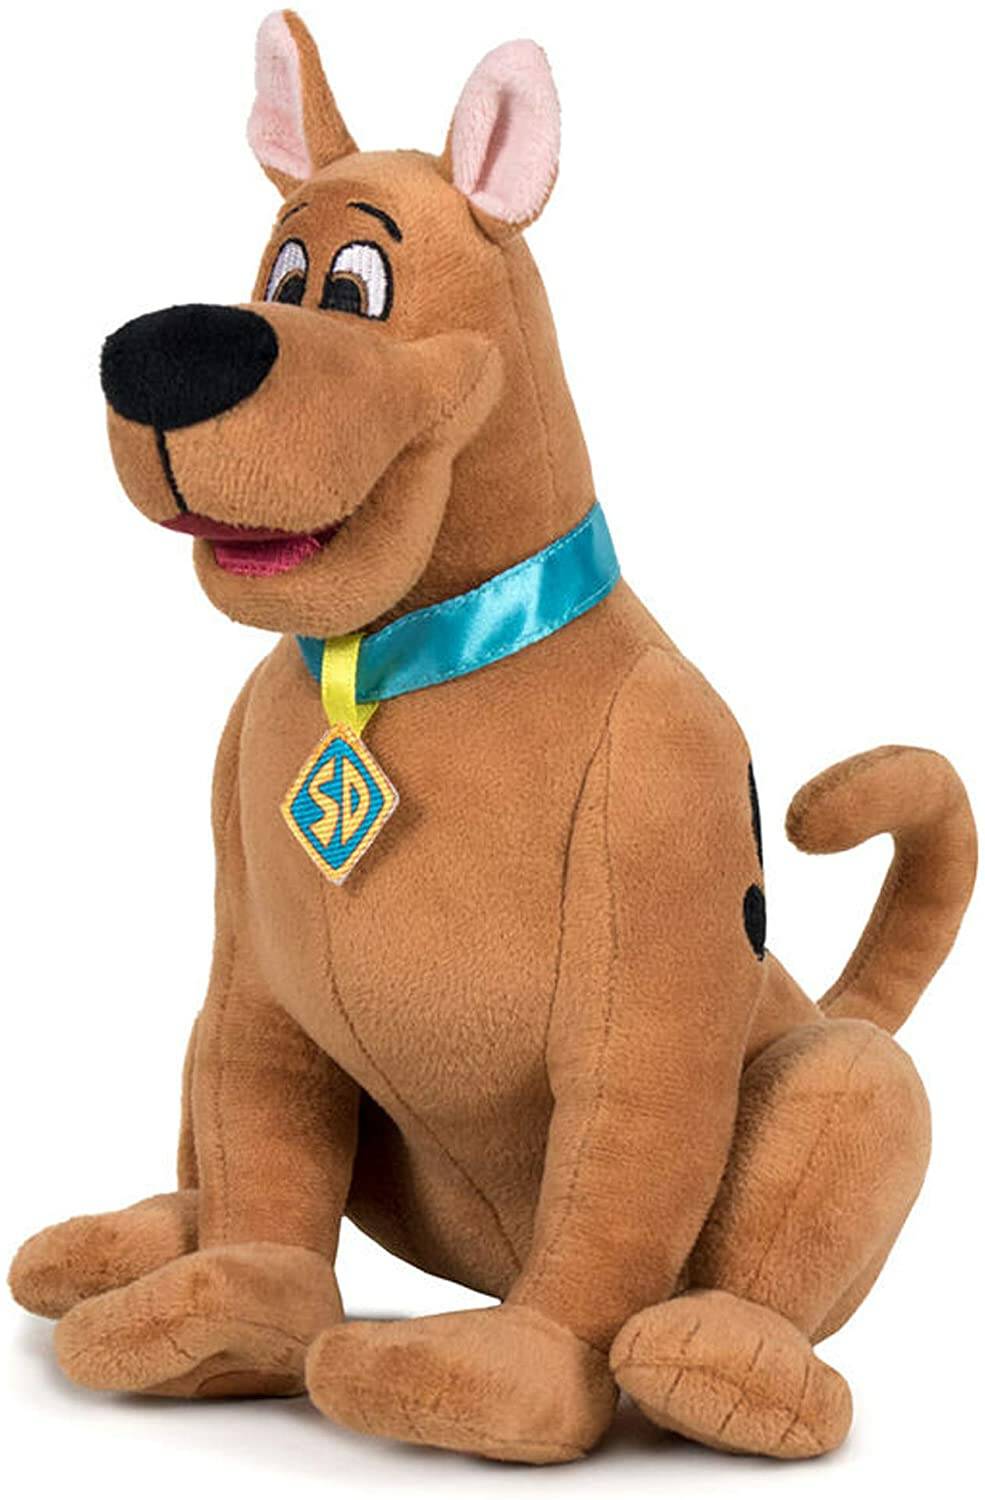 Scooby Movies & Games